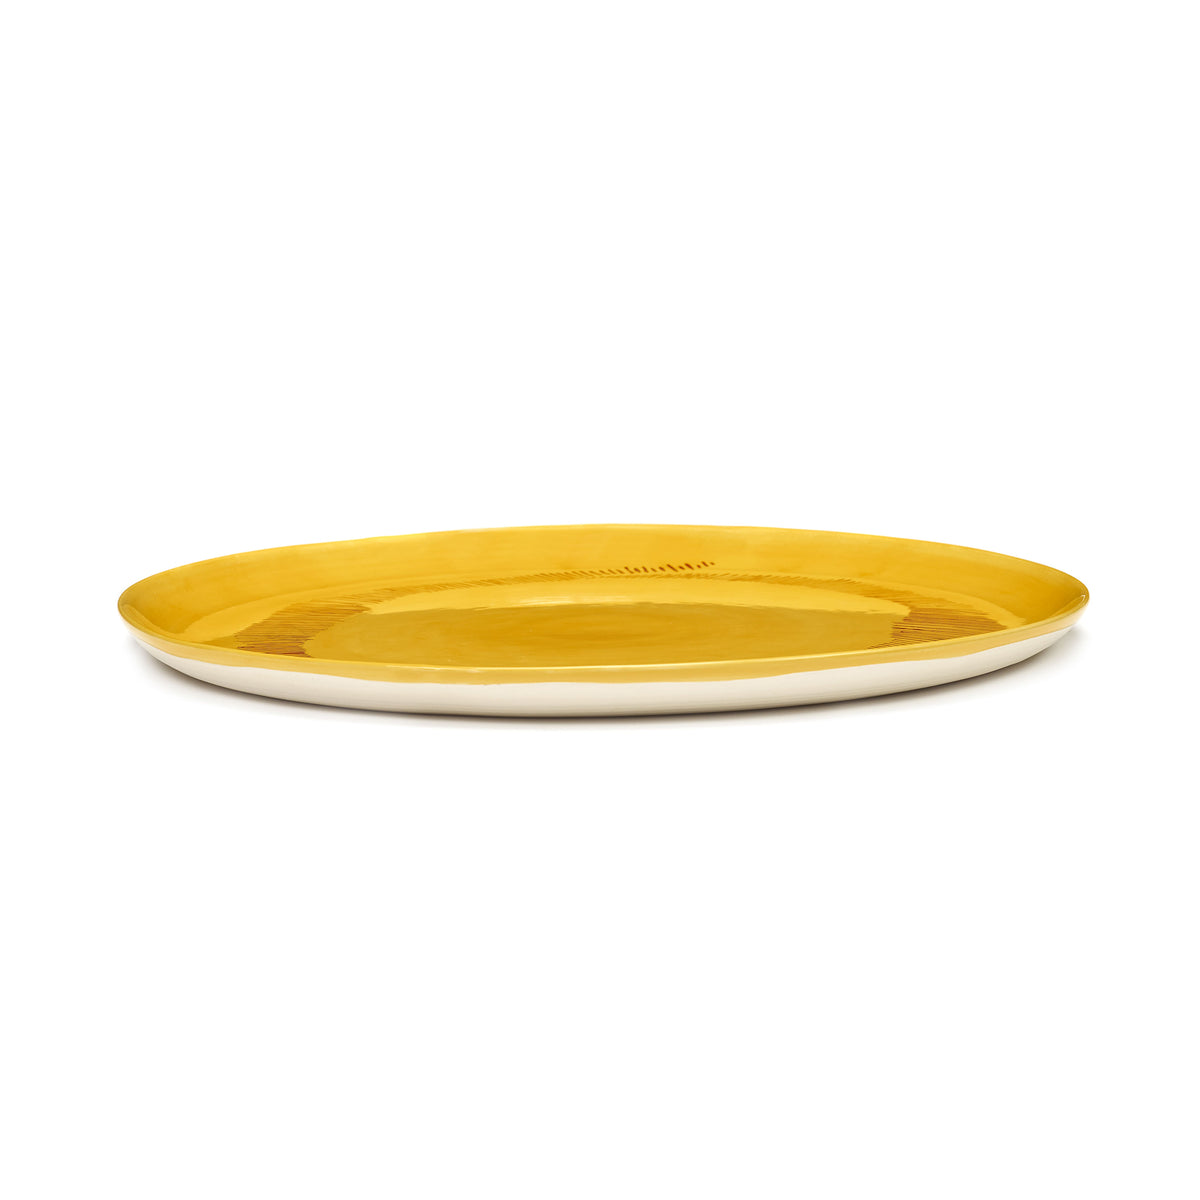 Sunny Yellow Serving Plate with Red Stripes